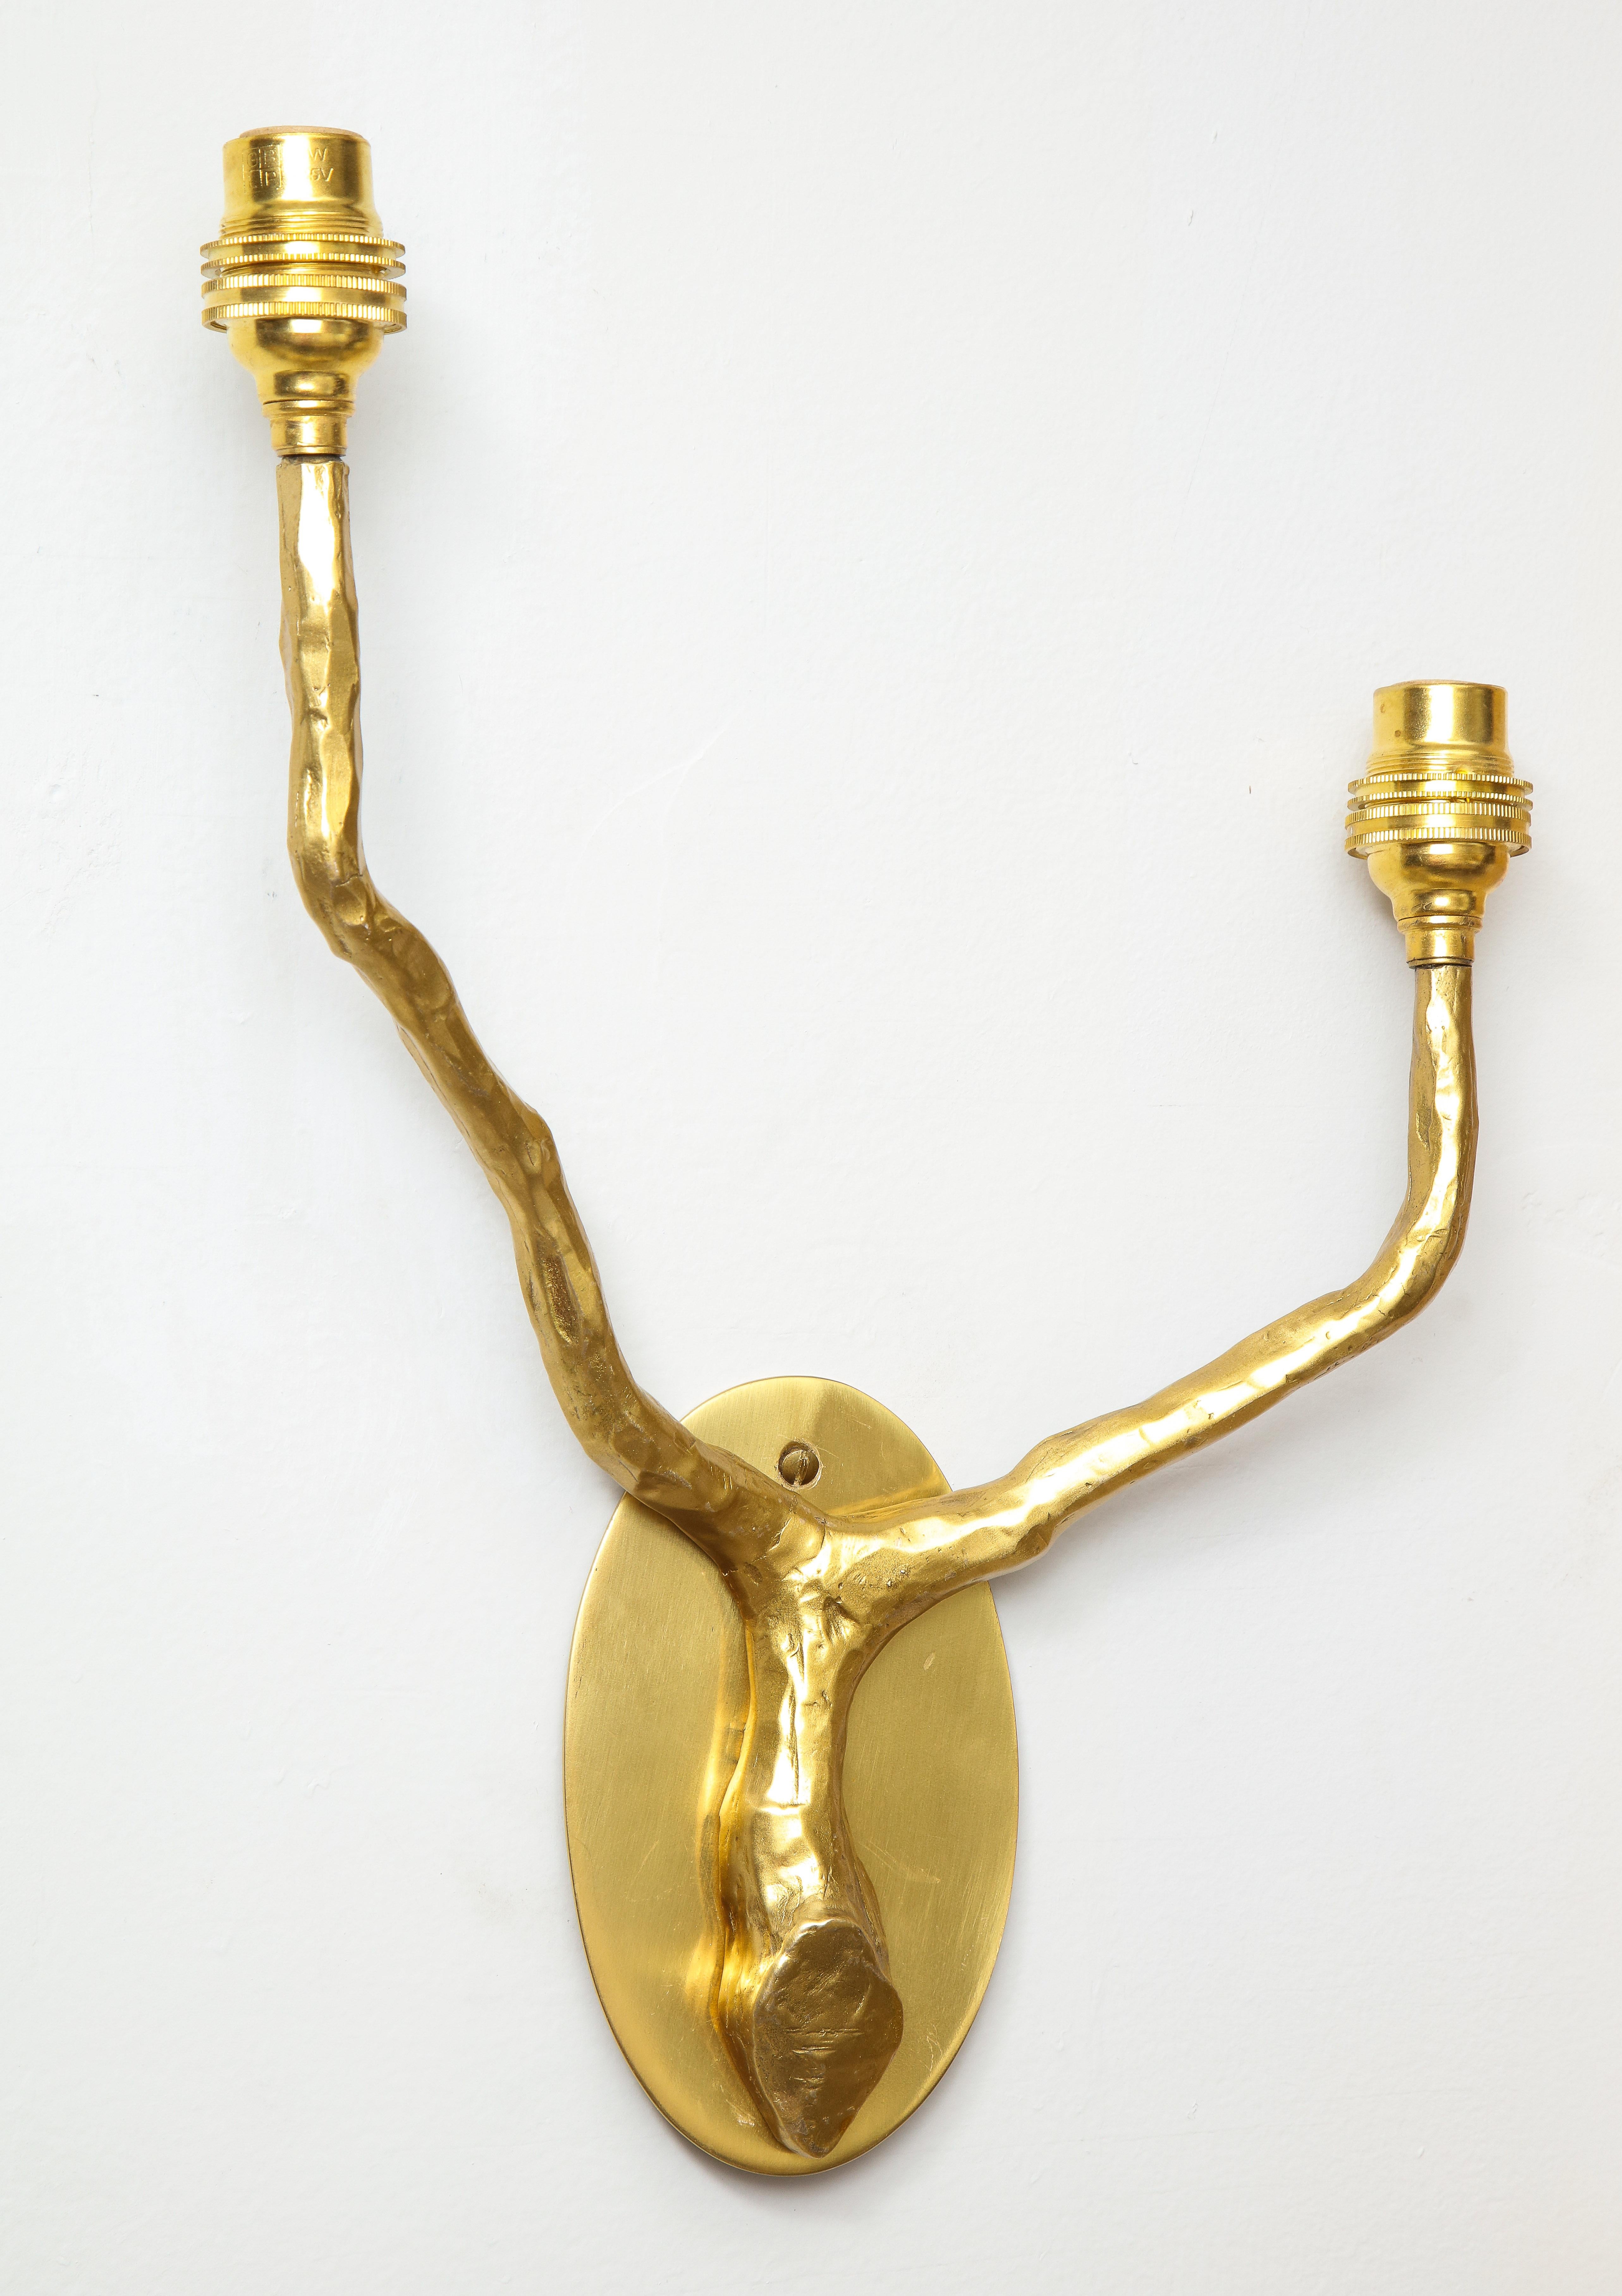 Pair of custom handcrafted arbre brass sconces. Please note these sconces are customizable- can be crafted in different sizes and finishes. Lead time is 6-8 weeks. The sconces are UL listed, pair in stock.